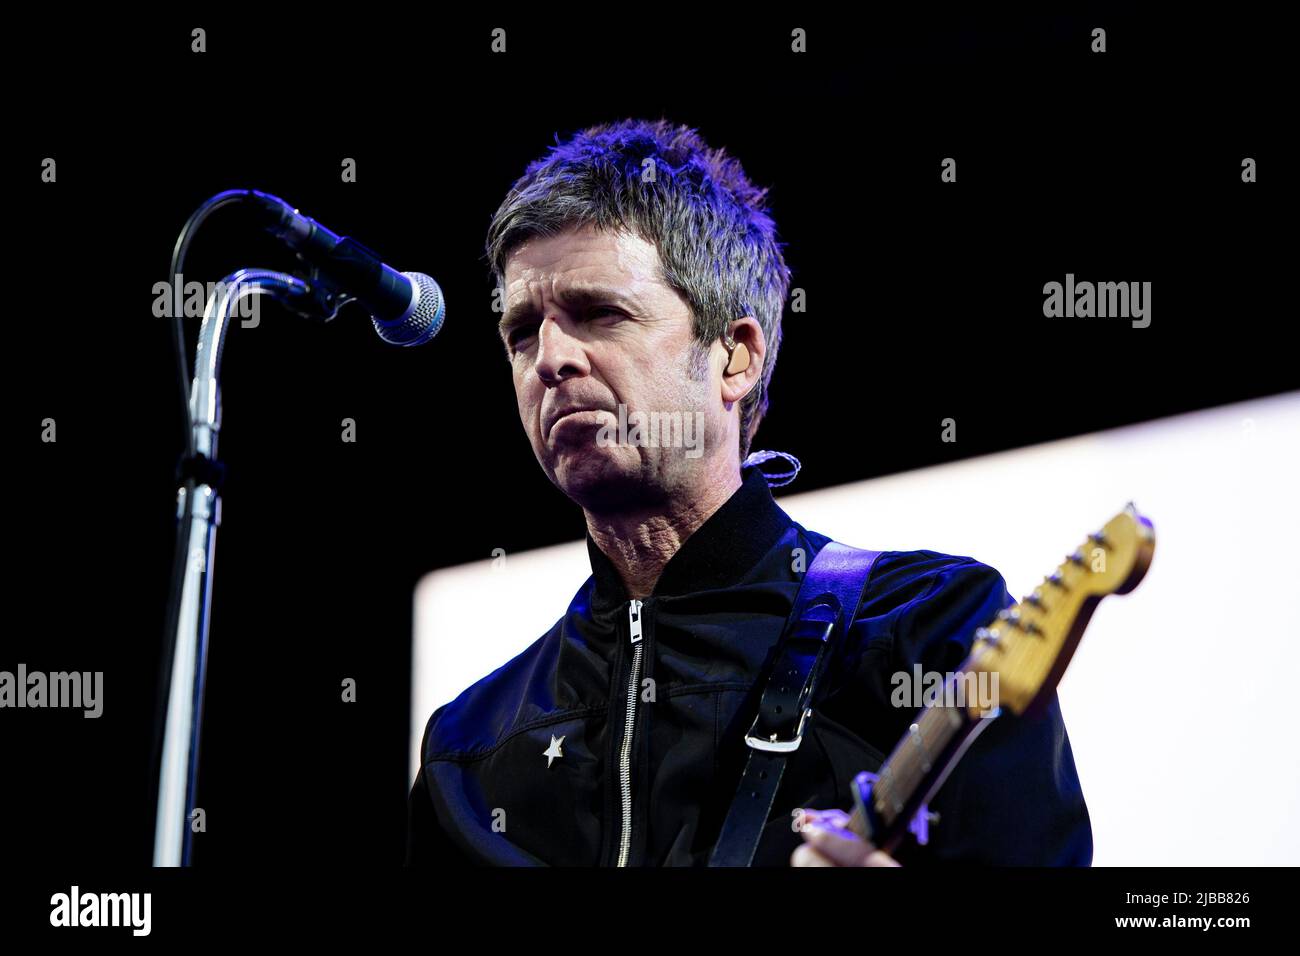 Margam, Wales . 04.. Juni 2022. Noel Gallaghers High Flying Birds beim in IT Together Festival in Margam, Wales, am 4.. Juni 2022. Quelle: Lewis Mitchell/Alamy Live News Stockfoto